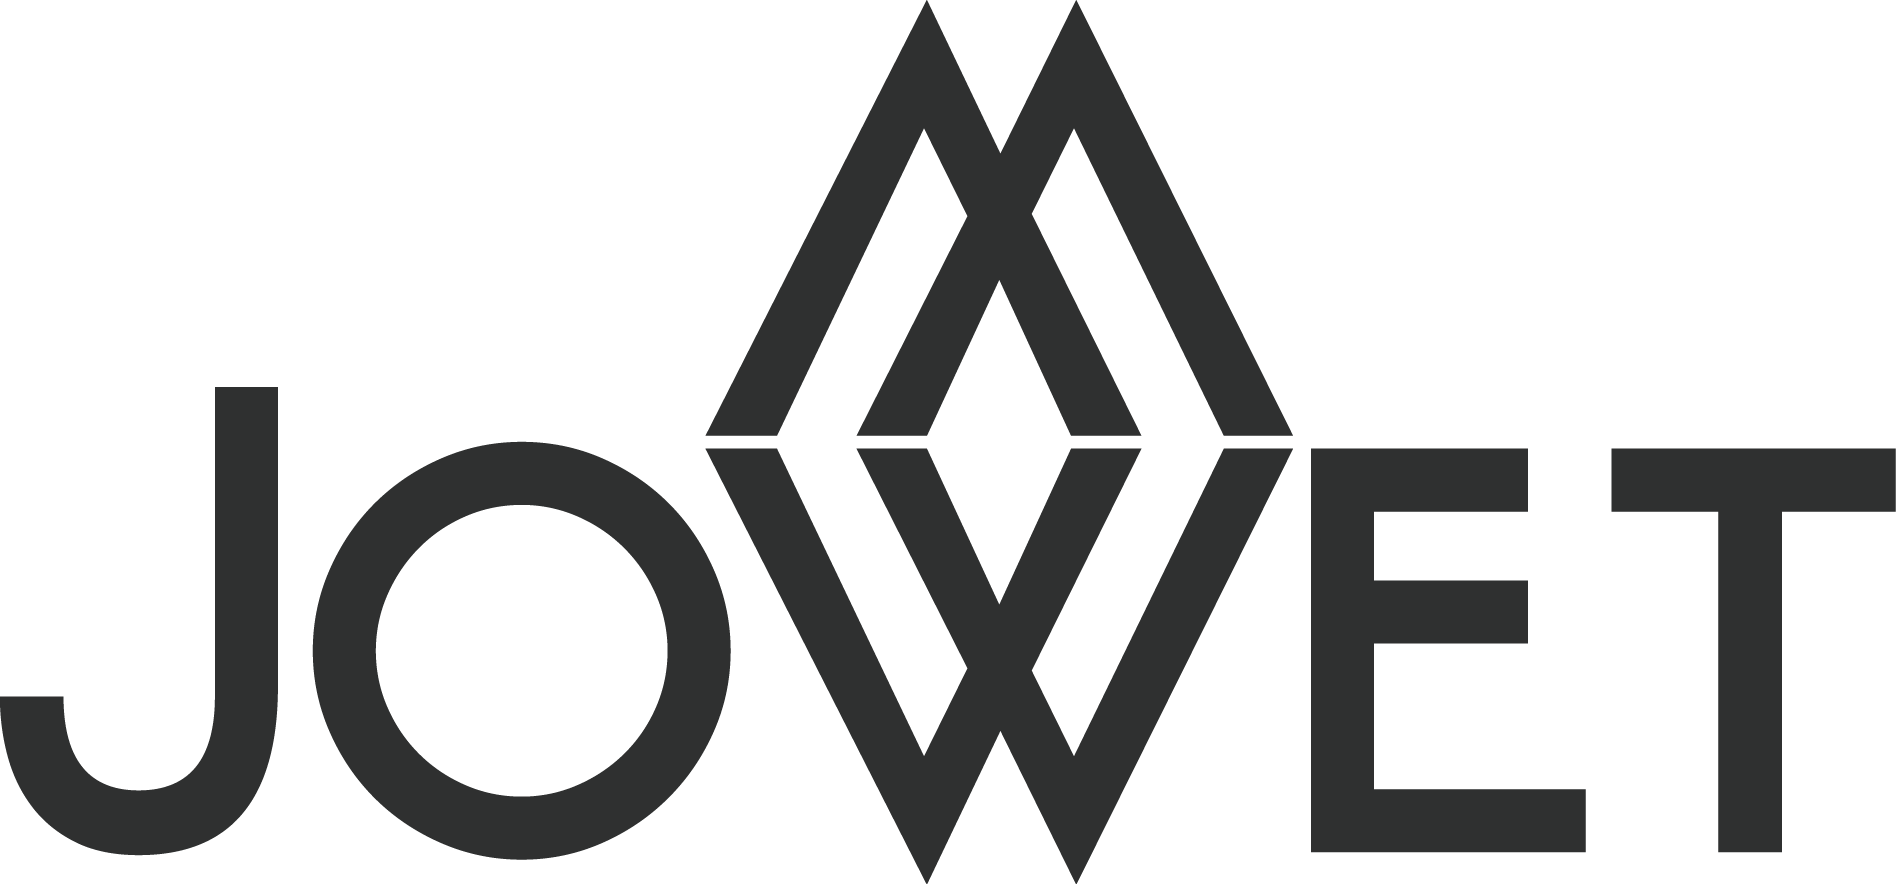 jowet.com is for sale